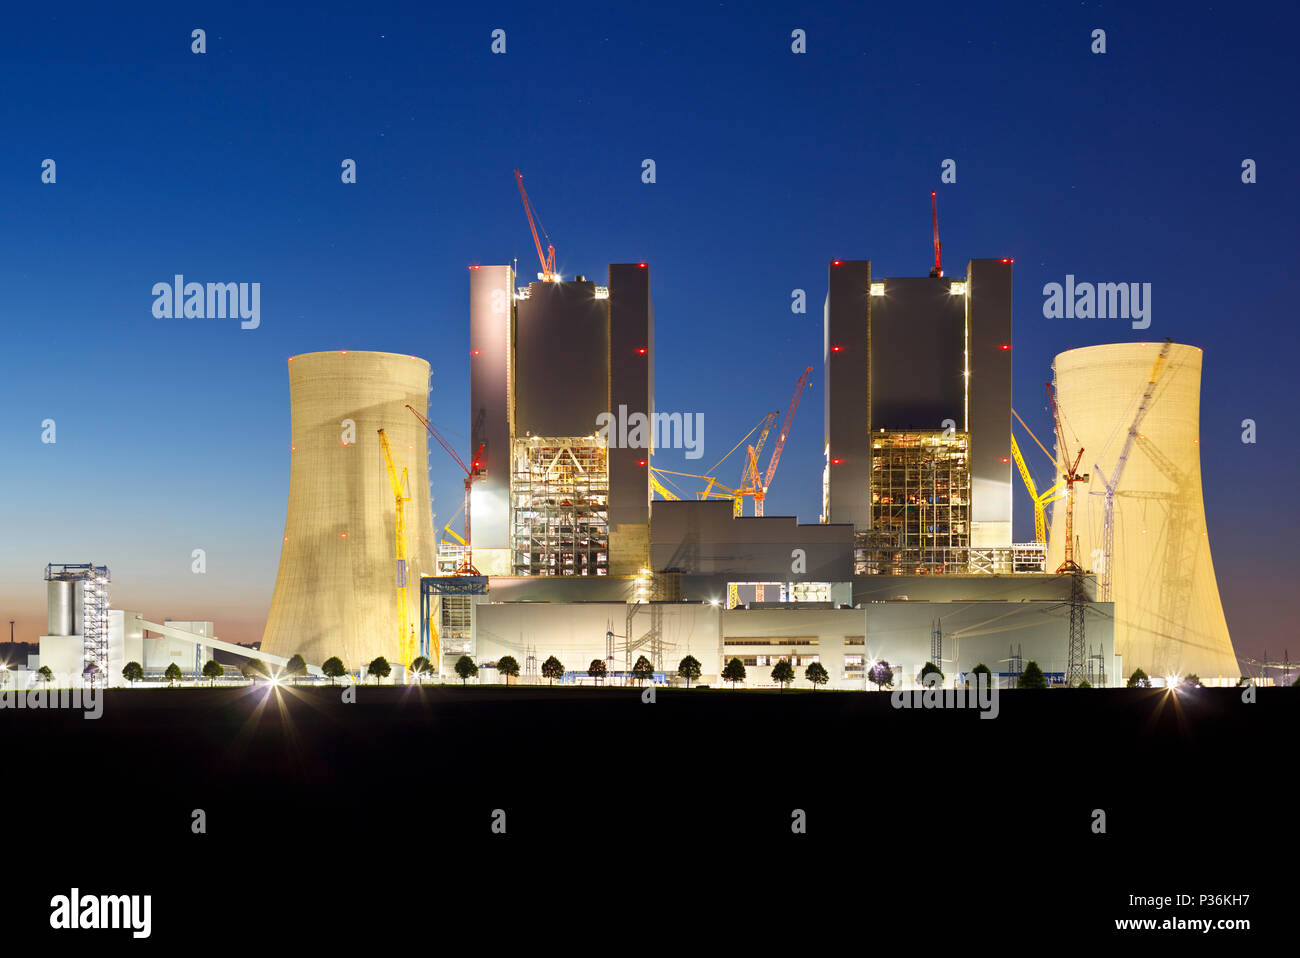 Construction site of a new brown coal power plant at night. Stock Photo